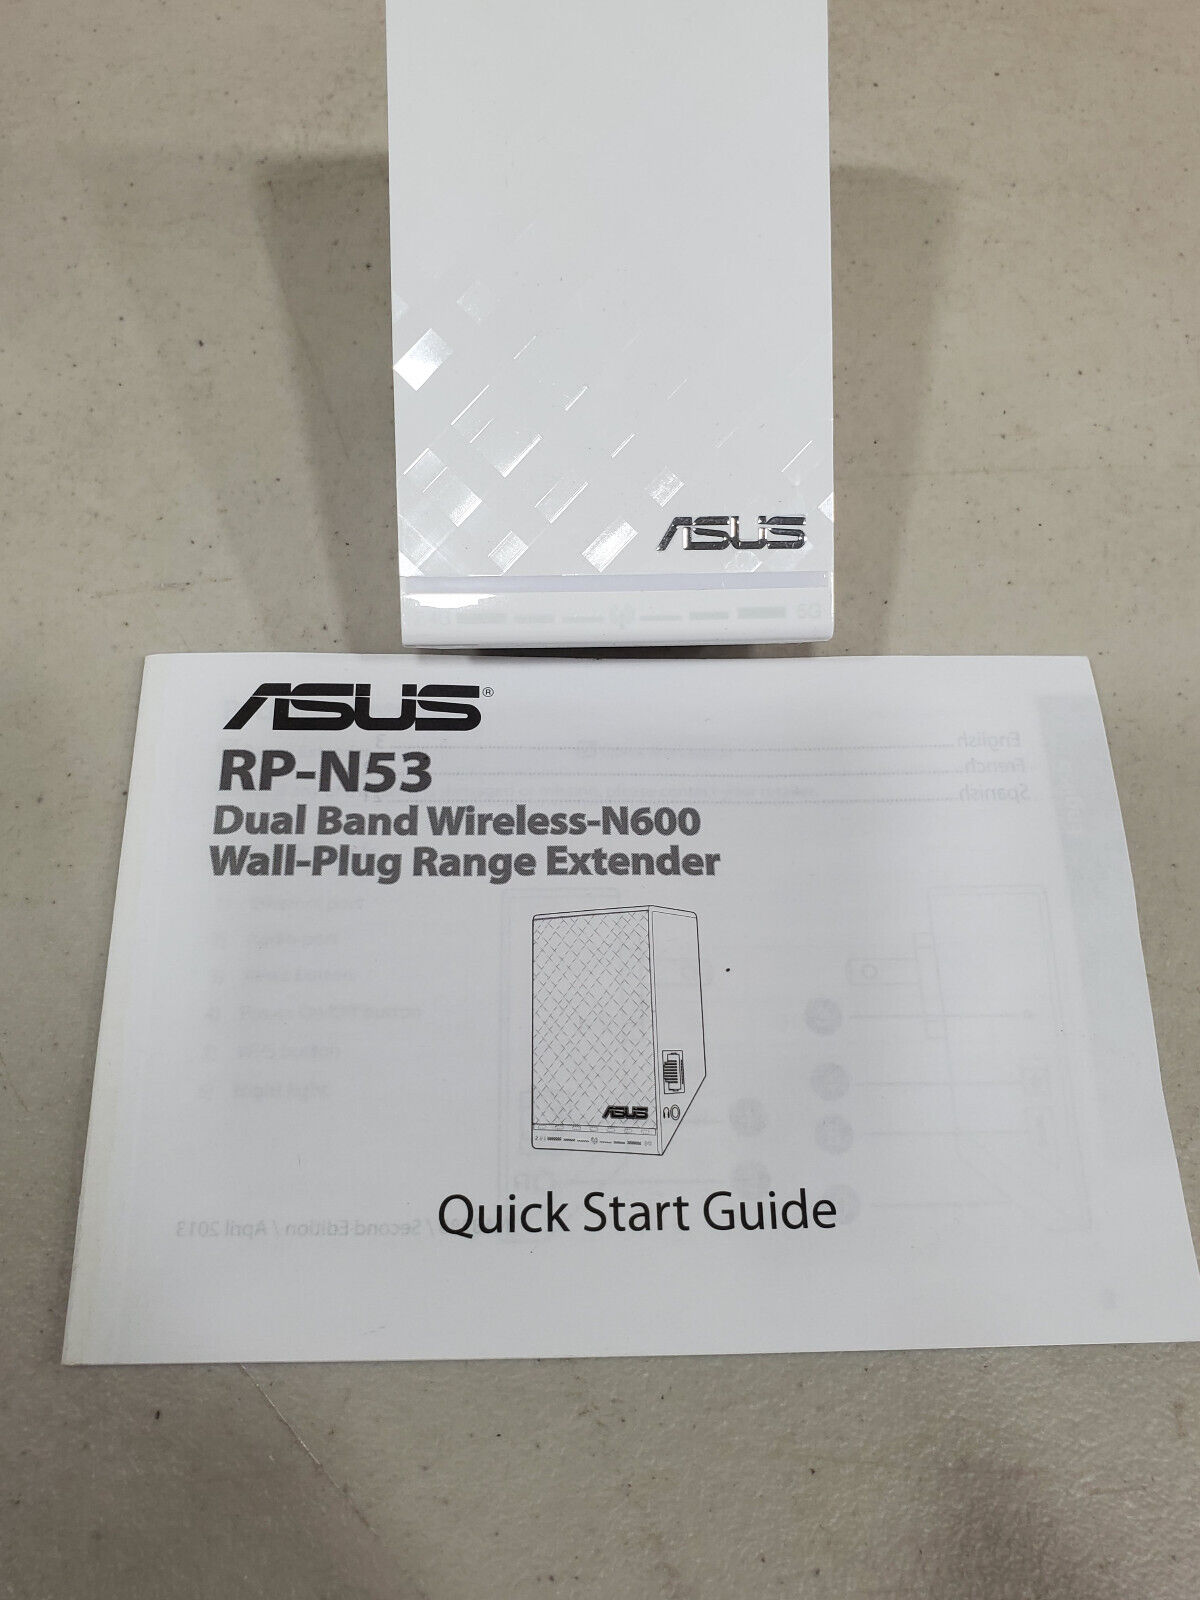 ASUS RP-N53 Dual-Band Wireless N600 Range Extender Tested And Defaulted